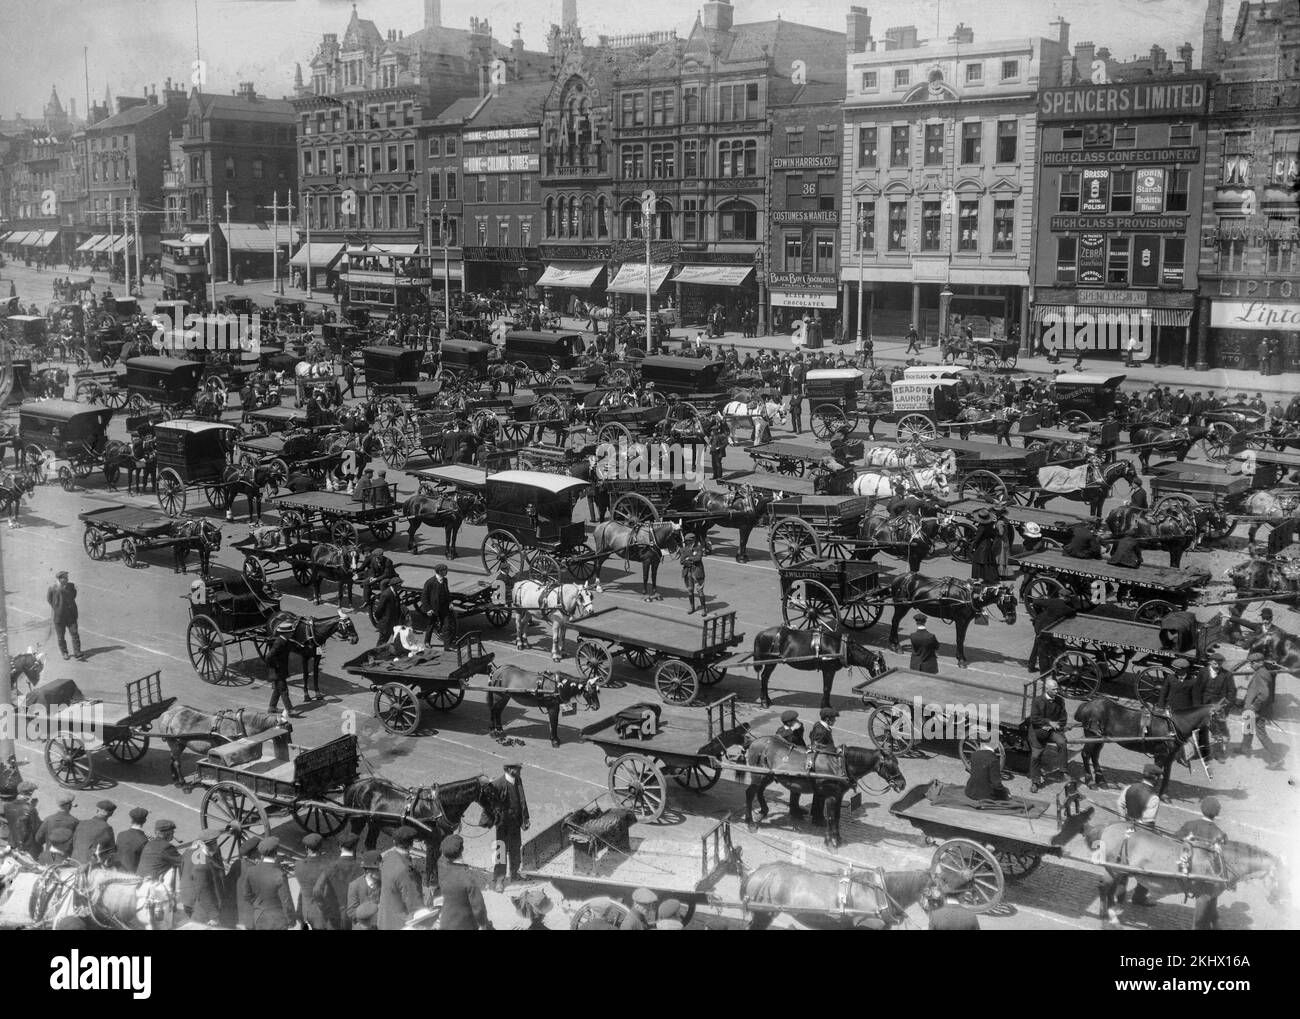 A late Victorian black and white photograph showing the centre of Nottingham in England, with many horse drawn carriages and carts on the streets. The names of many shops are visible. Stock Photo